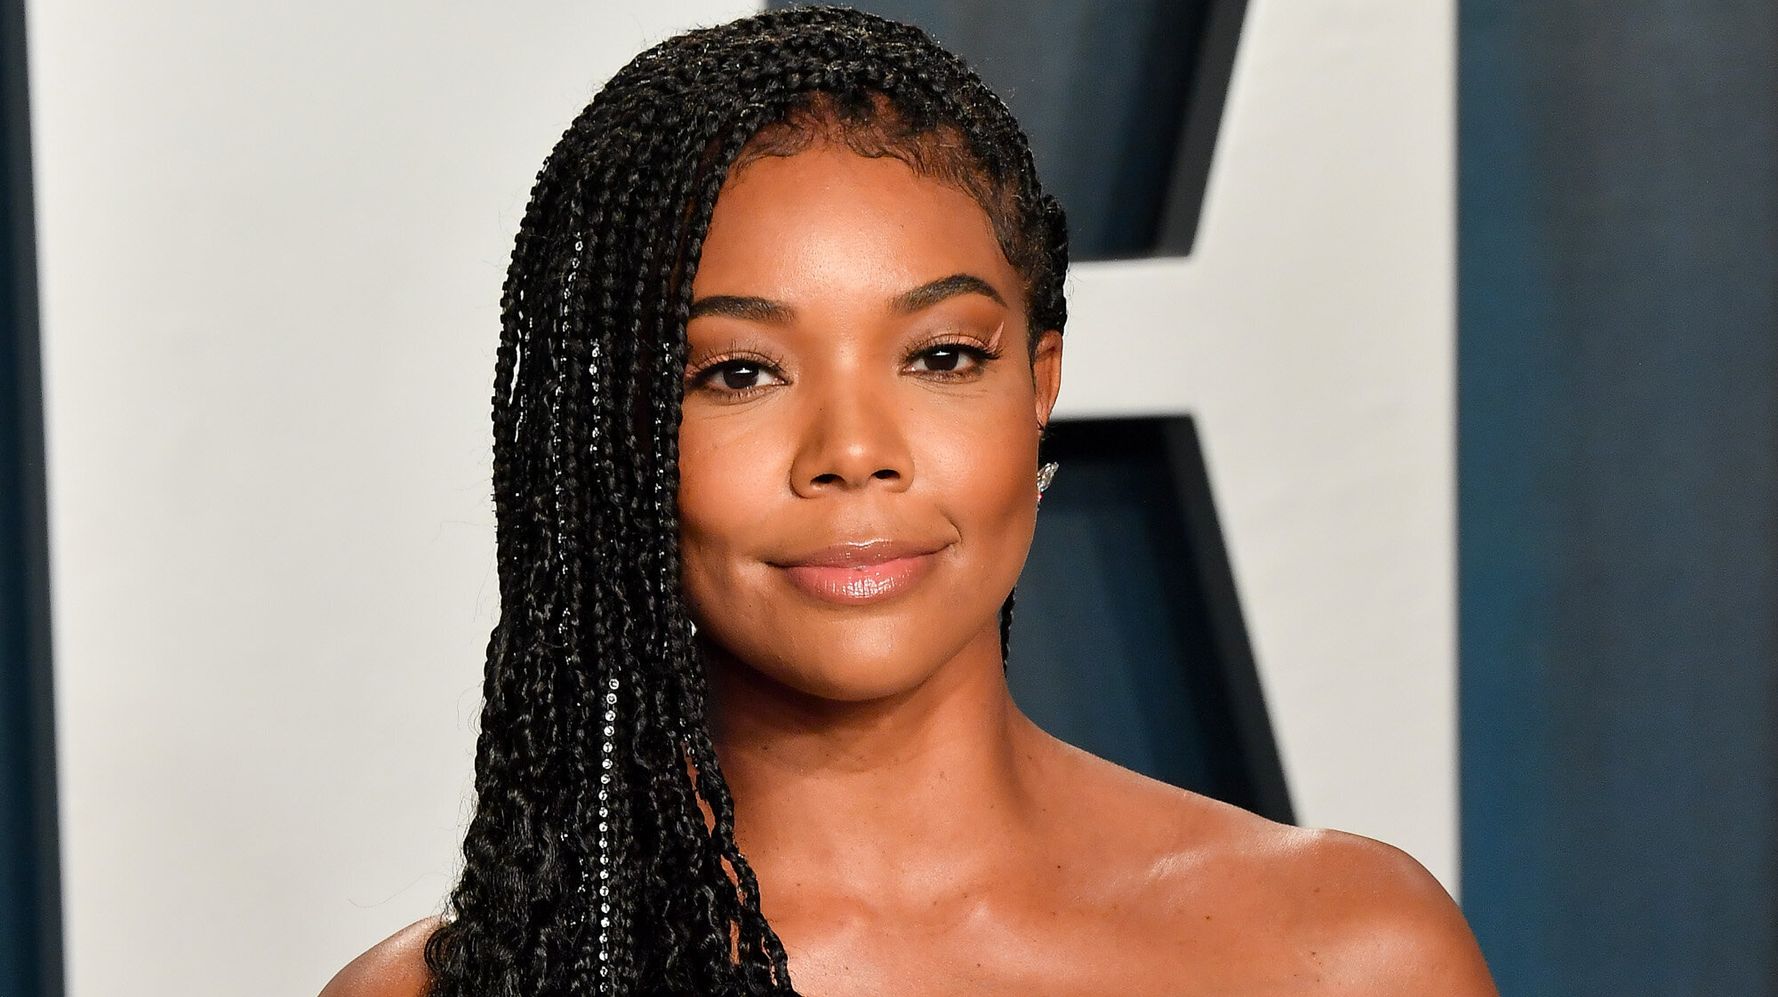 Gabrielle Union Flaunts Natural Curls After Her 'Big Chop': 'I Did A Thing'